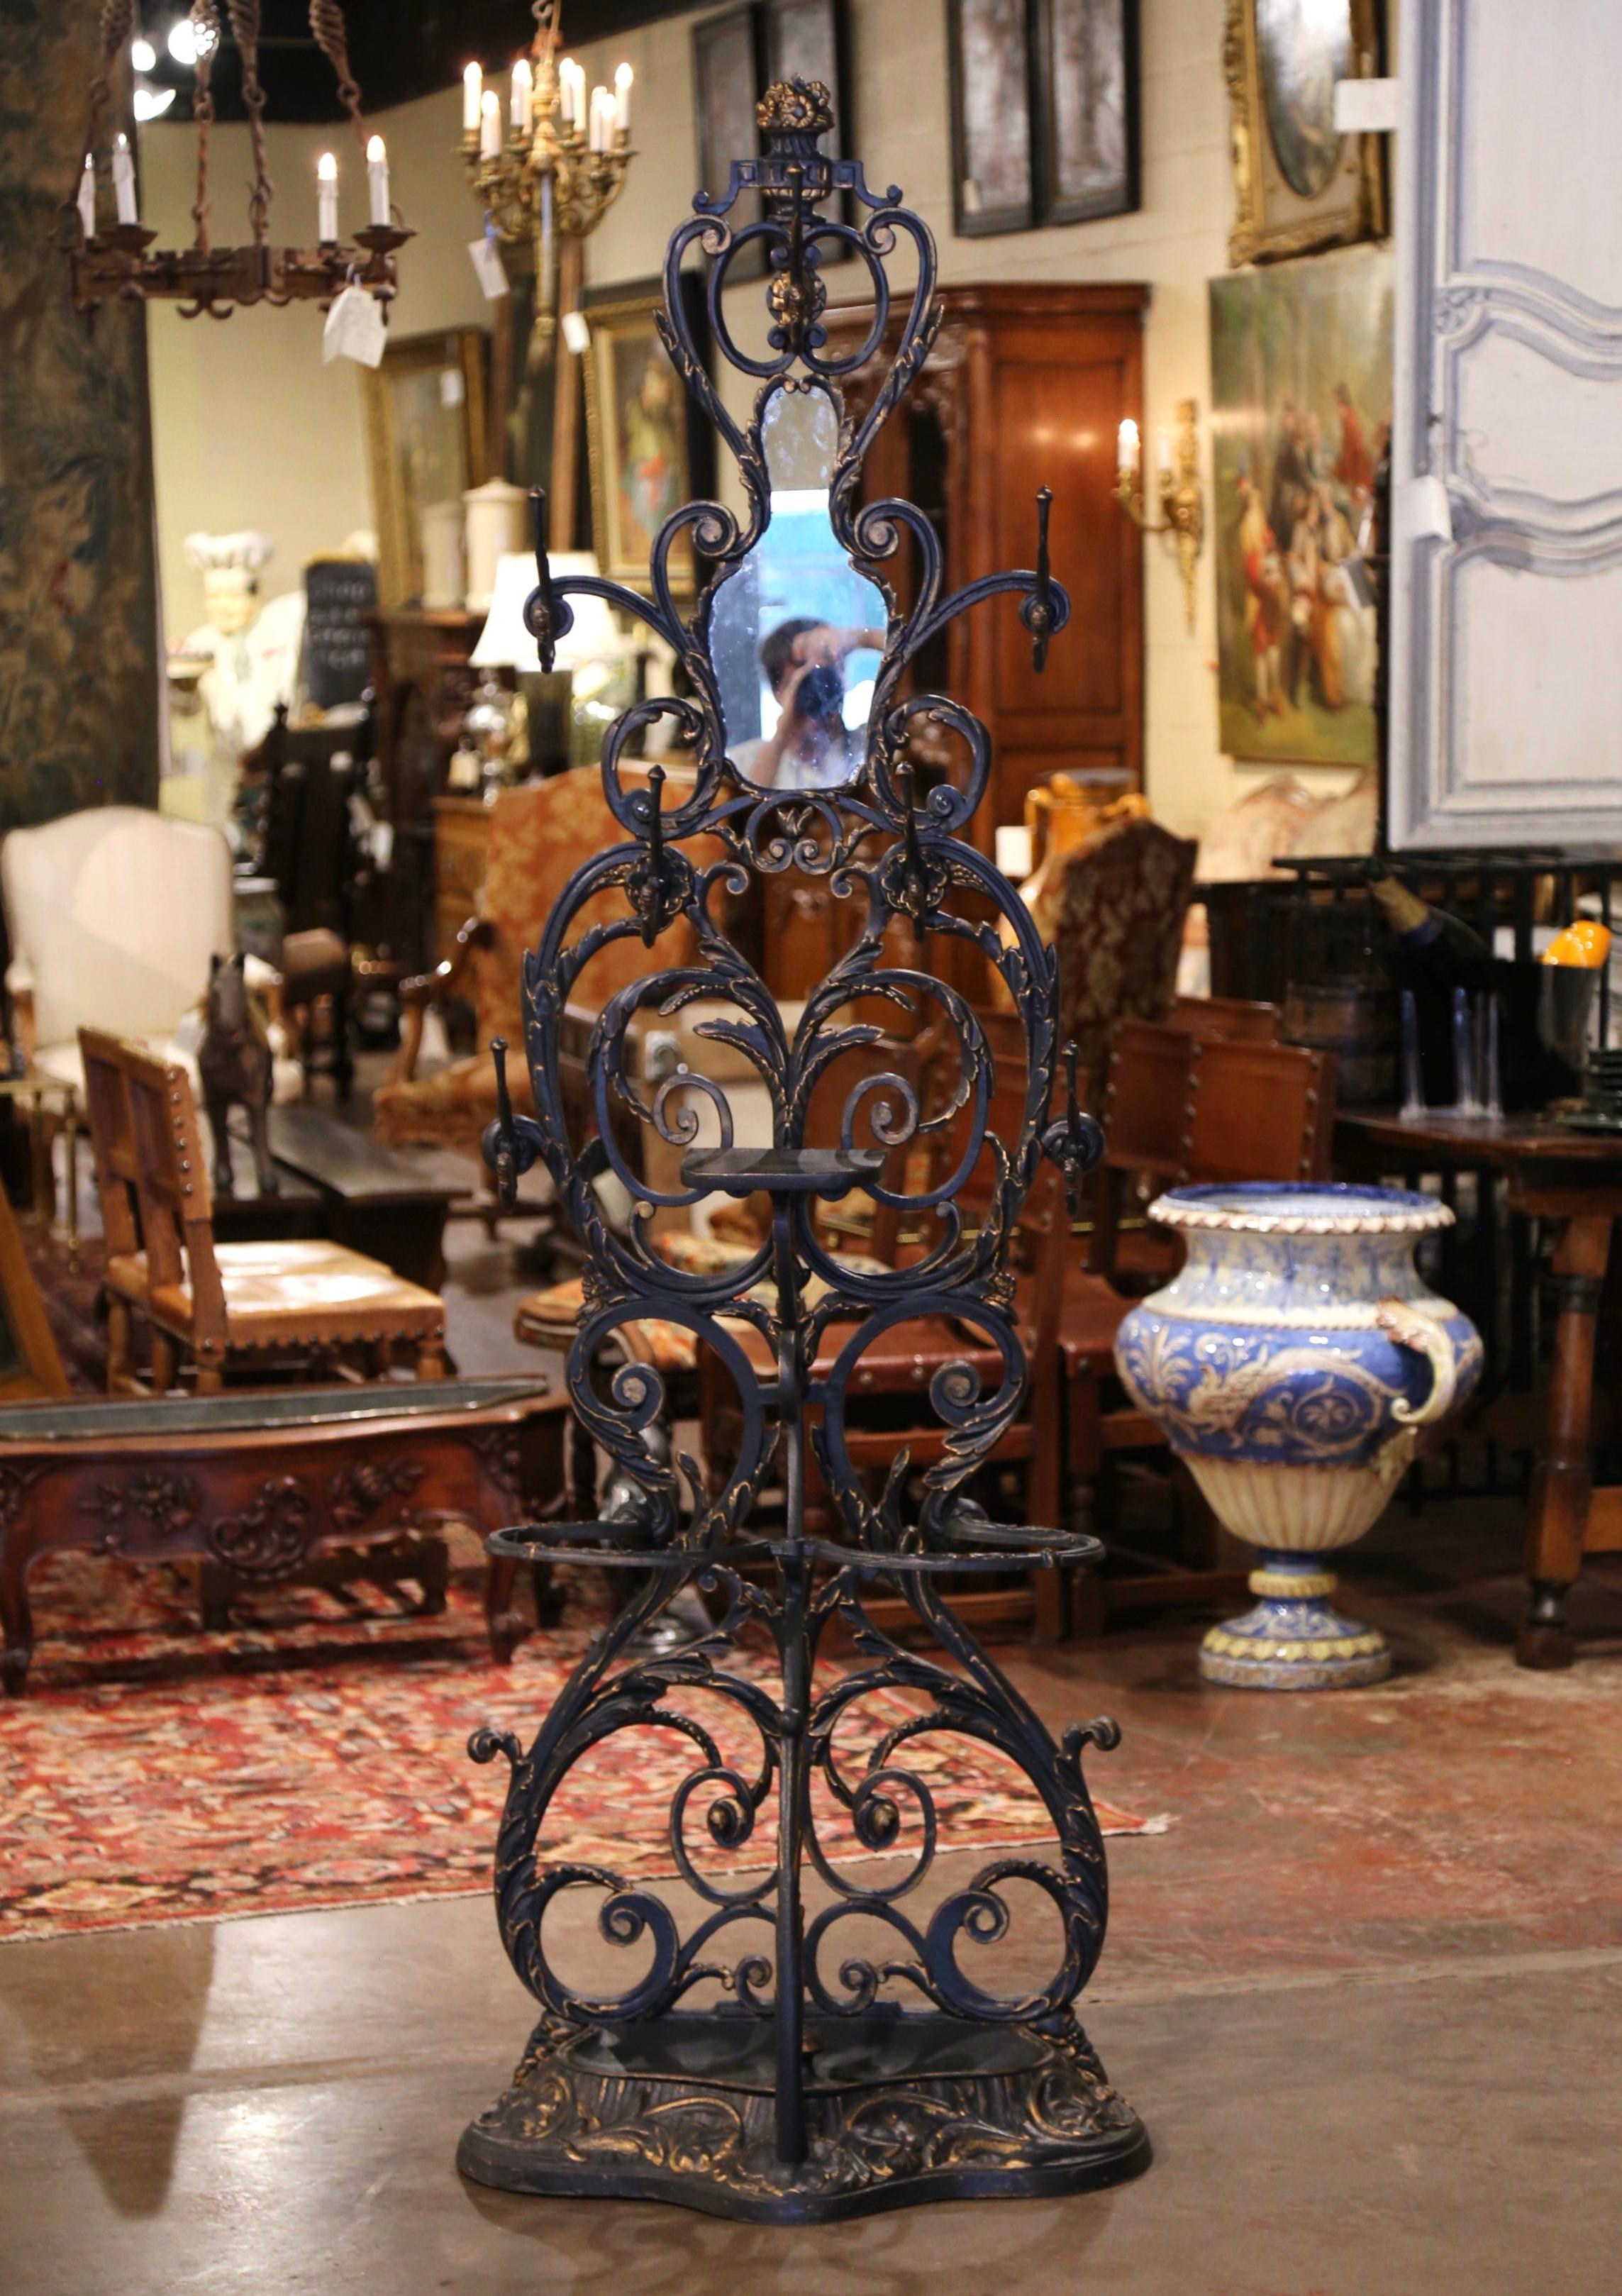 19th Century Napoleon III Verdigris and Gilt Painted Iron Halltree Coat Rack In Excellent Condition For Sale In Dallas, TX